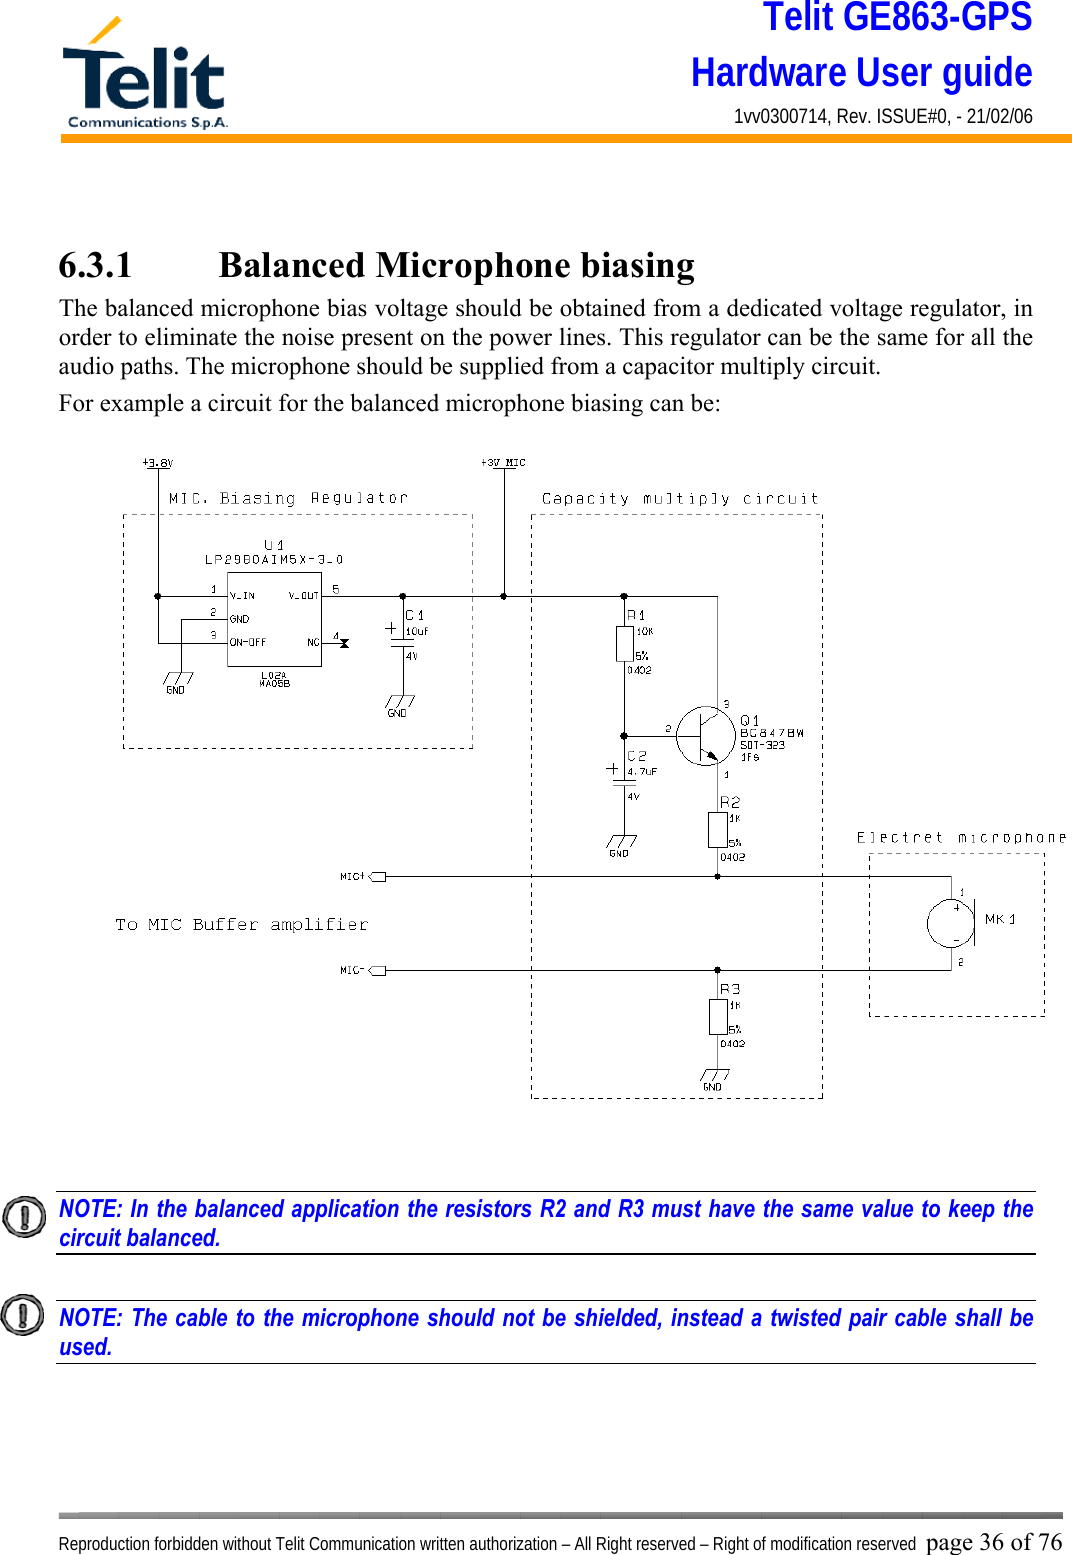 Telit GE863-GPS Hardware User guide 1vv0300714, Rev. ISSUE#0, - 21/02/06    Reproduction forbidden without Telit Communication written authorization – All Right reserved – Right of modification reserved page 36 of 76  6.3.1    Balanced Microphone biasing The balanced microphone bias voltage should be obtained from a dedicated voltage regulator, in order to eliminate the noise present on the power lines. This regulator can be the same for all the audio paths. The microphone should be supplied from a capacitor multiply circuit. For example a circuit for the balanced microphone biasing can be:   NOTE: In the balanced application the resistors R2 and R3 must have the same value to keep the circuit balanced.    NOTE: The cable to the microphone should not be shielded, instead a twisted pair cable shall be used.    